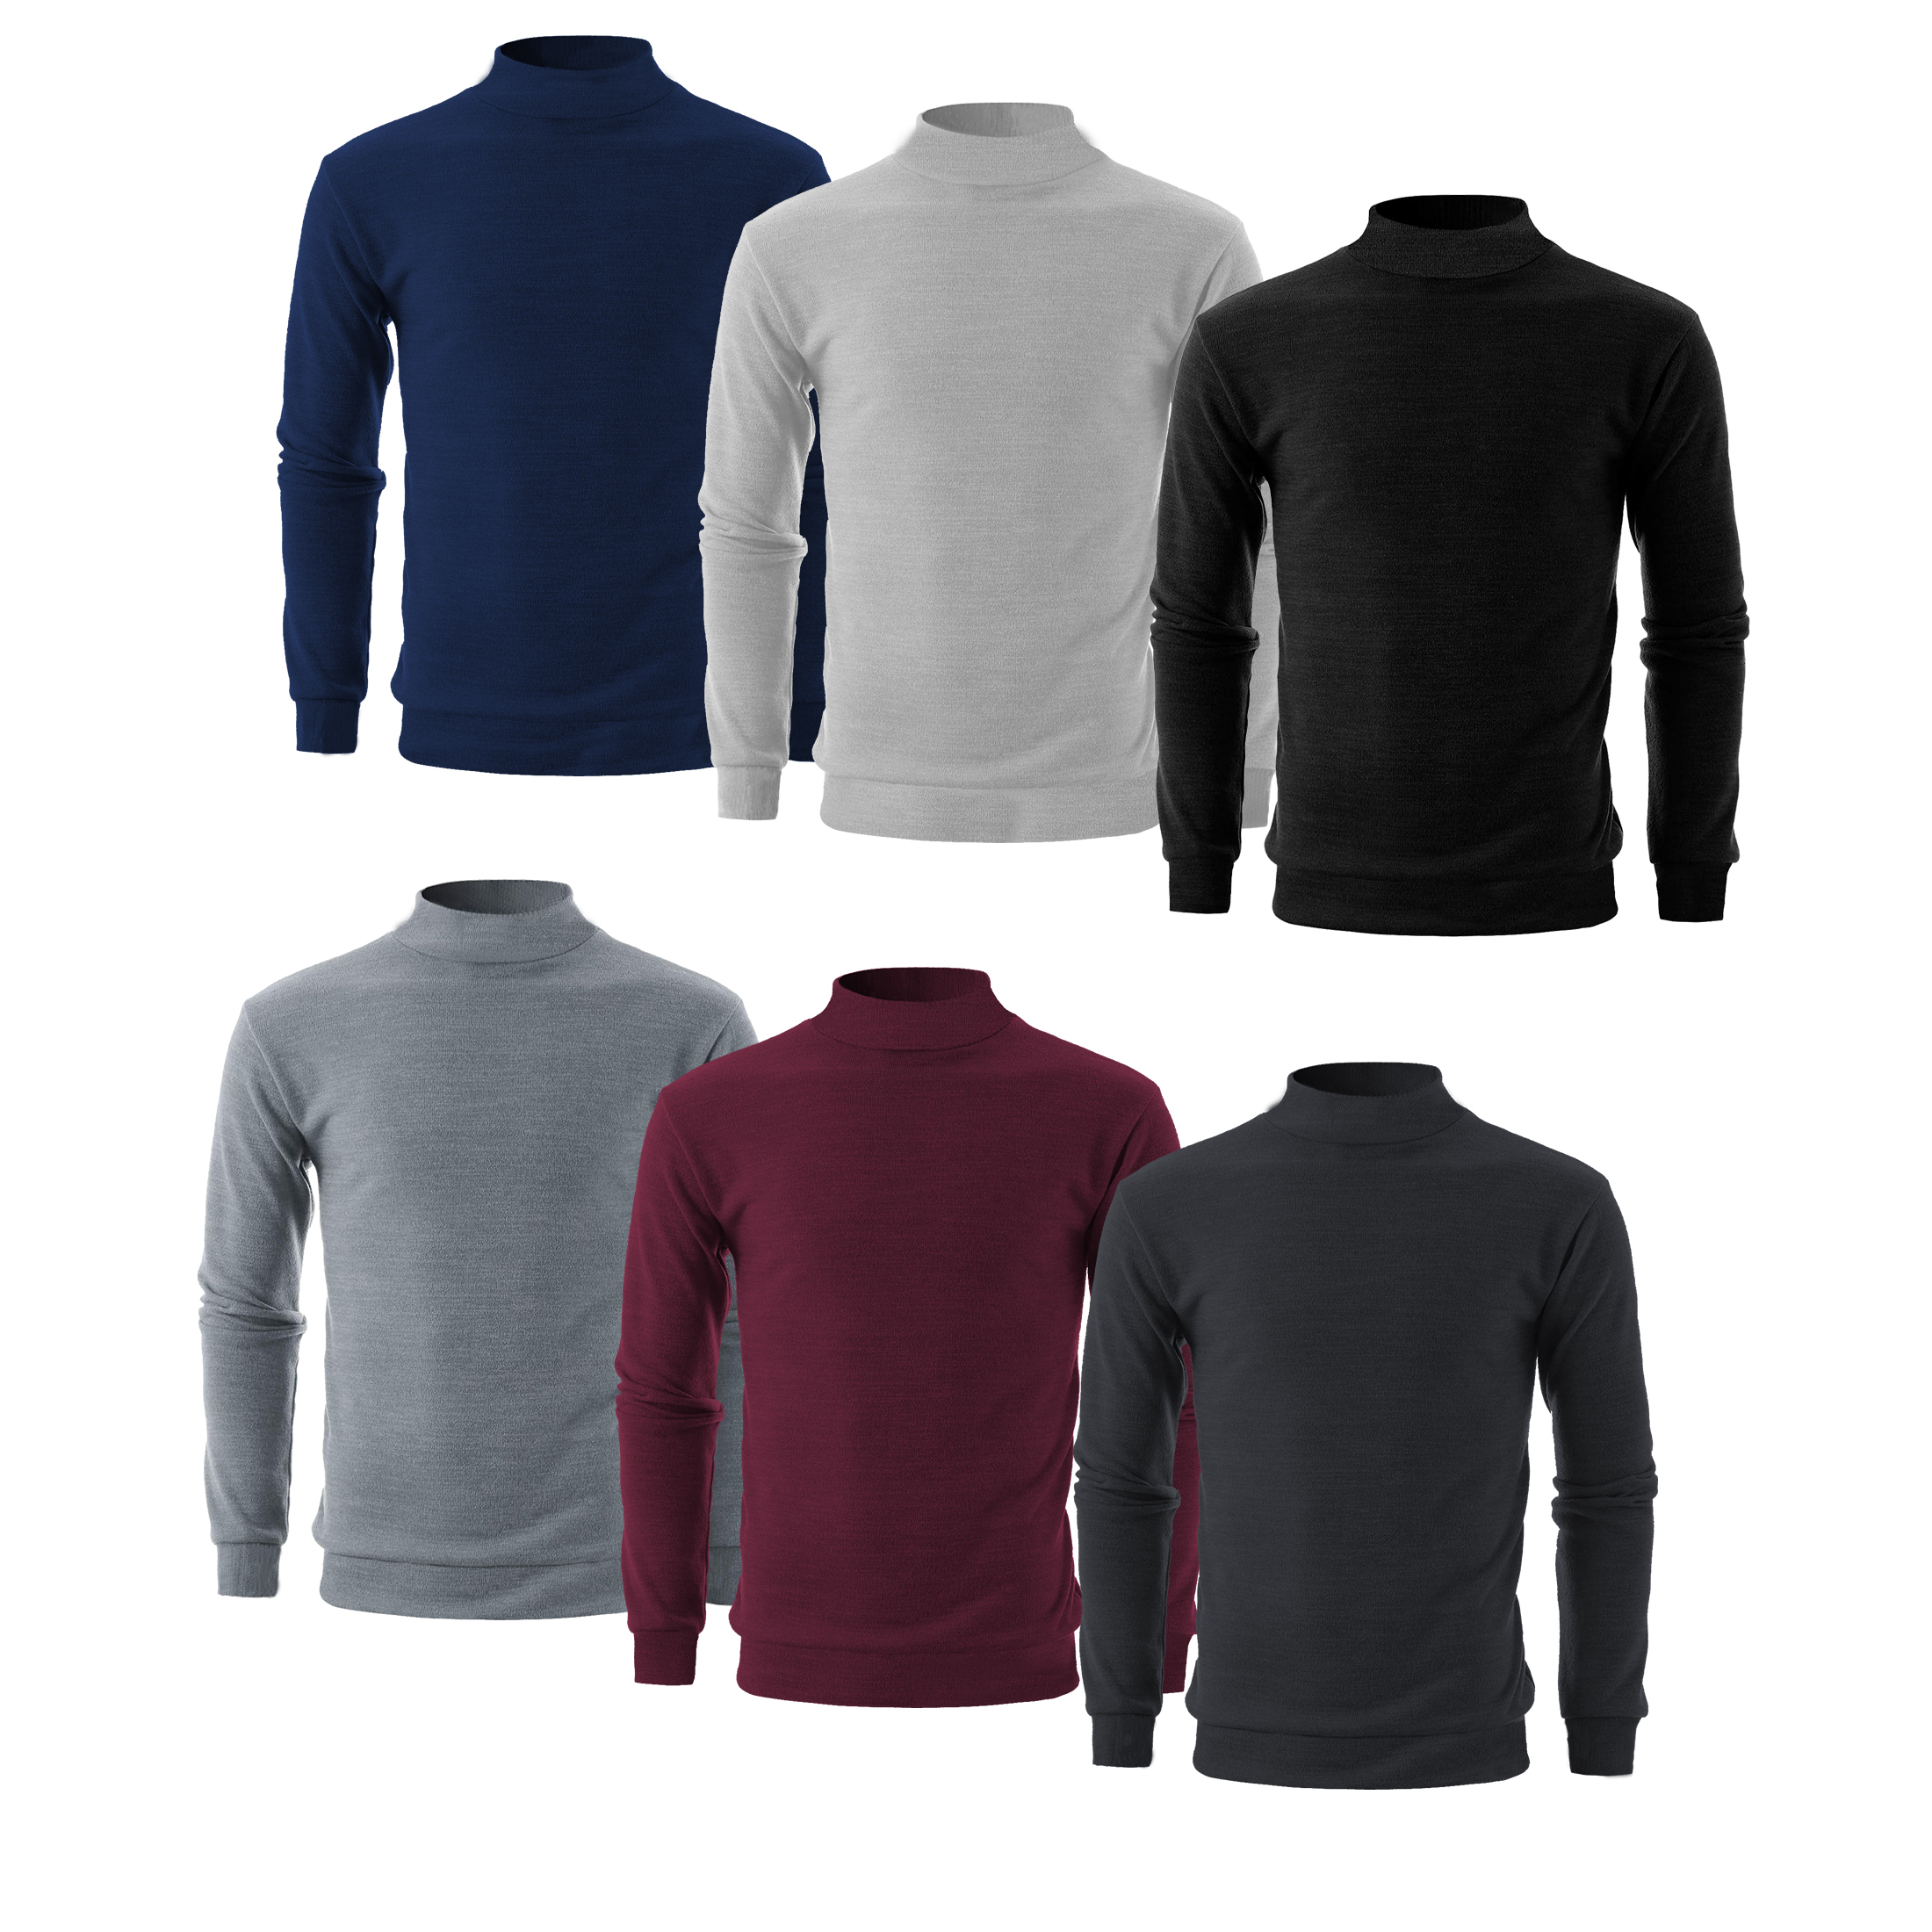 2 Pack:Men's Slim Fit Long Sleeve Casual Mock Neck Pullover Sweater - Large